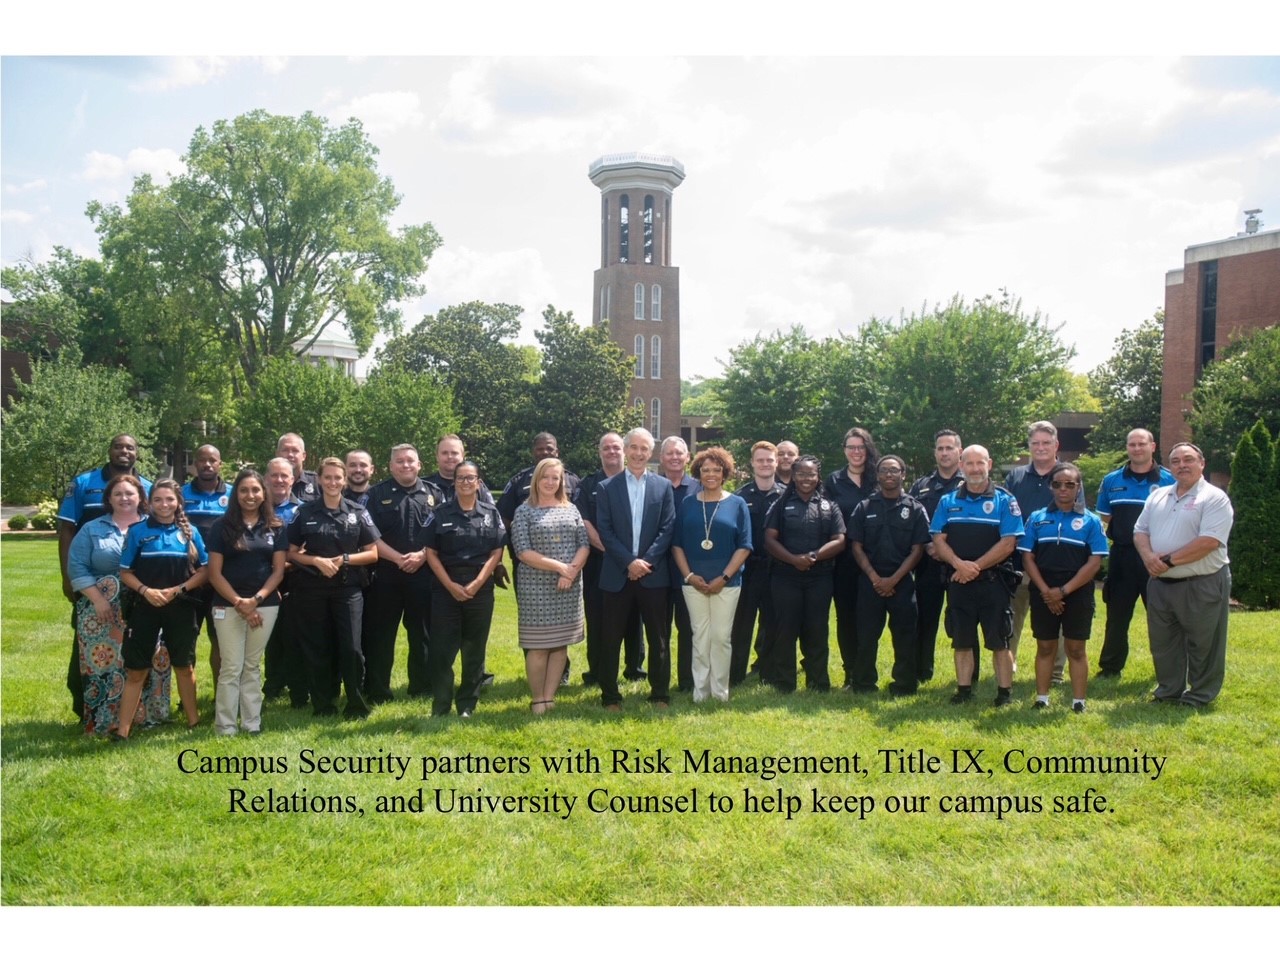 Members of the Office of Campus Security with Bruiser